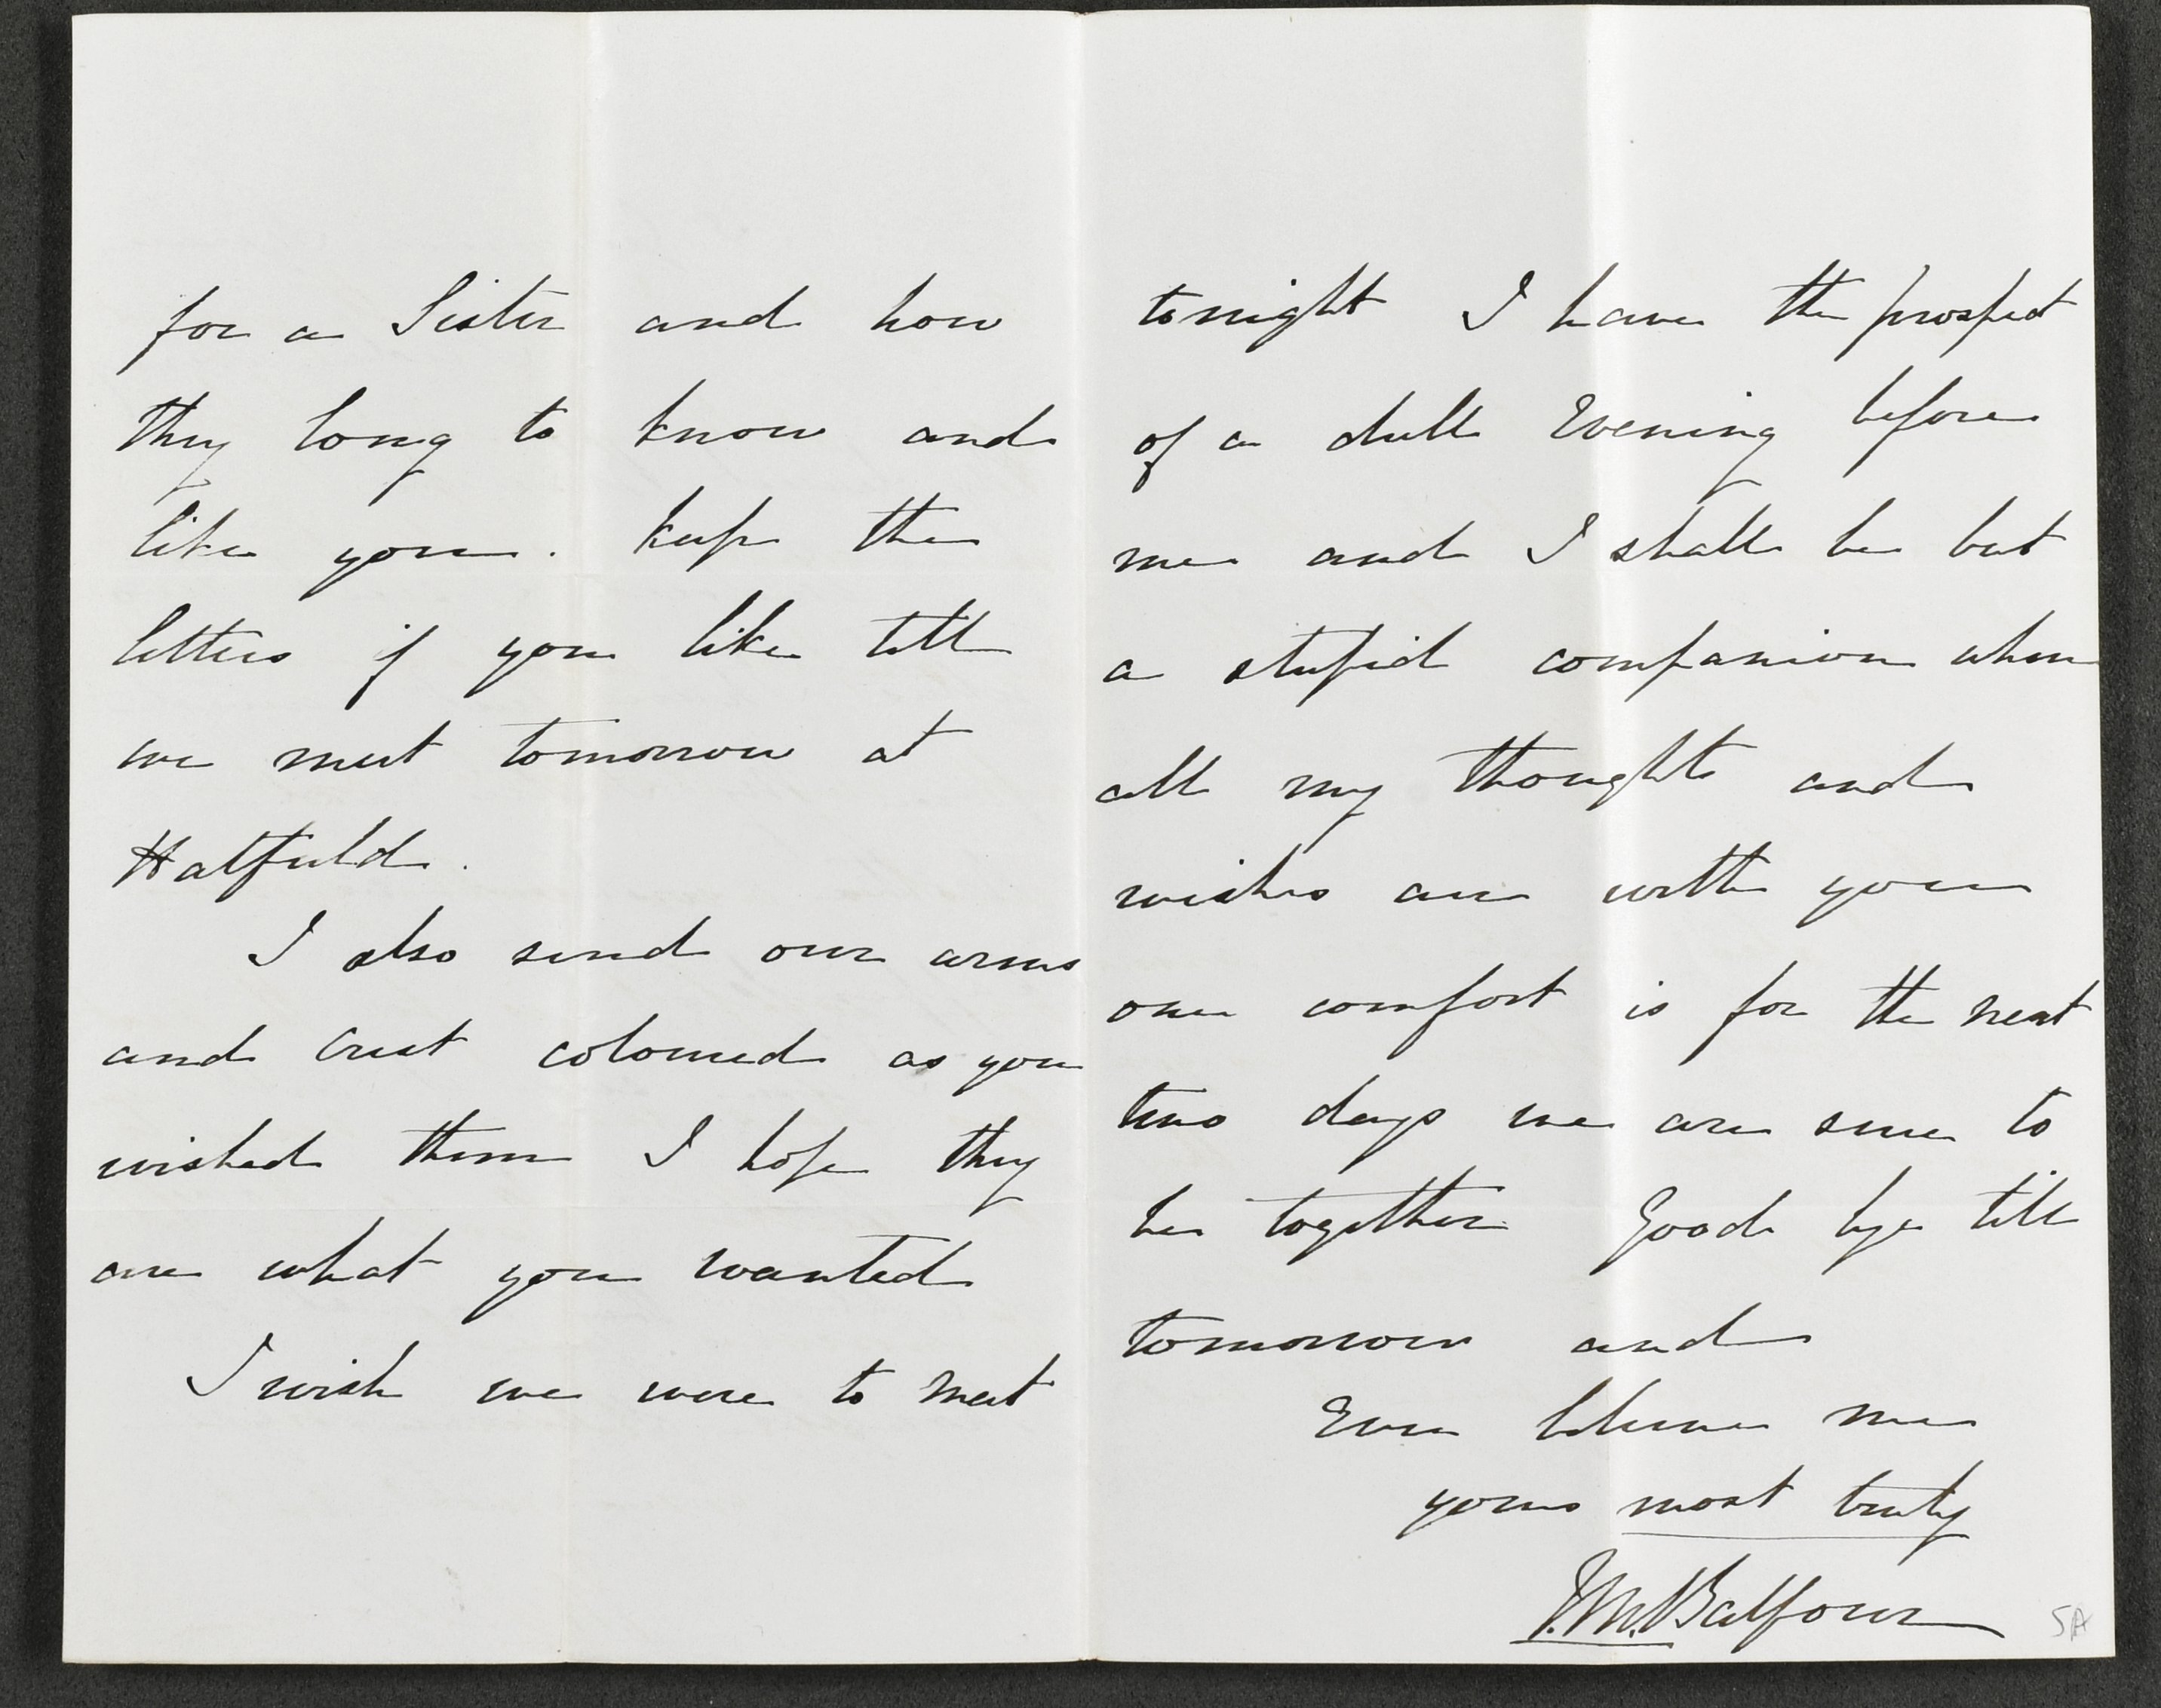 Letter from James Balfour to Lady Blanche following their engagement